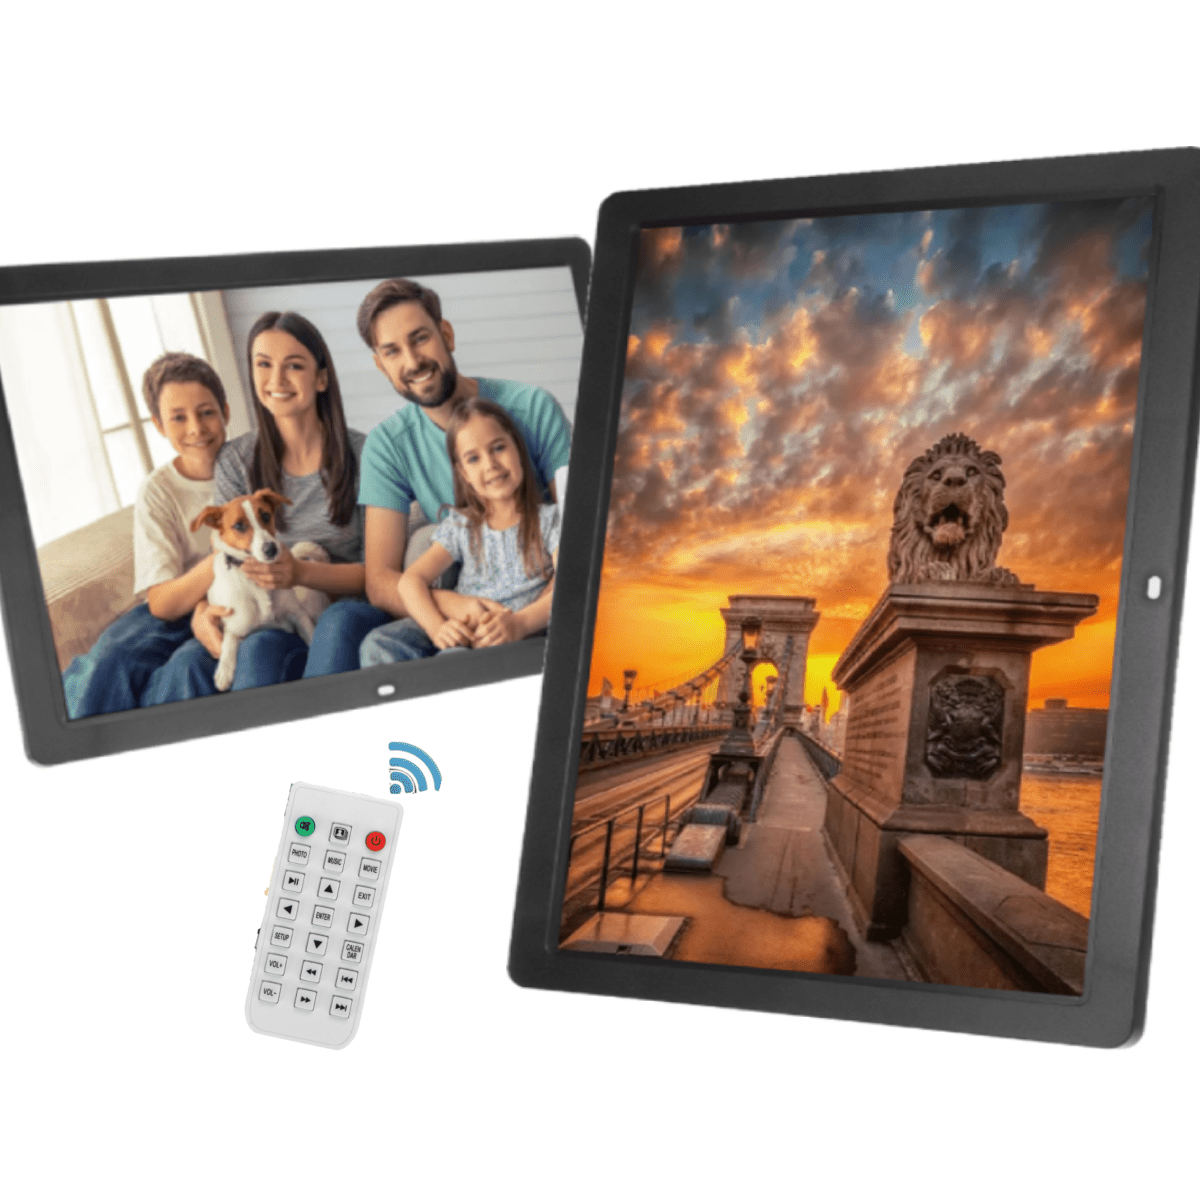 11.6 Inch HD Electronic Picture Frame Photo Music Video Player with Remote Control Black Digital Billboard Supports SD Card up to 32GB Digital Photo Frame Built-in Speaker